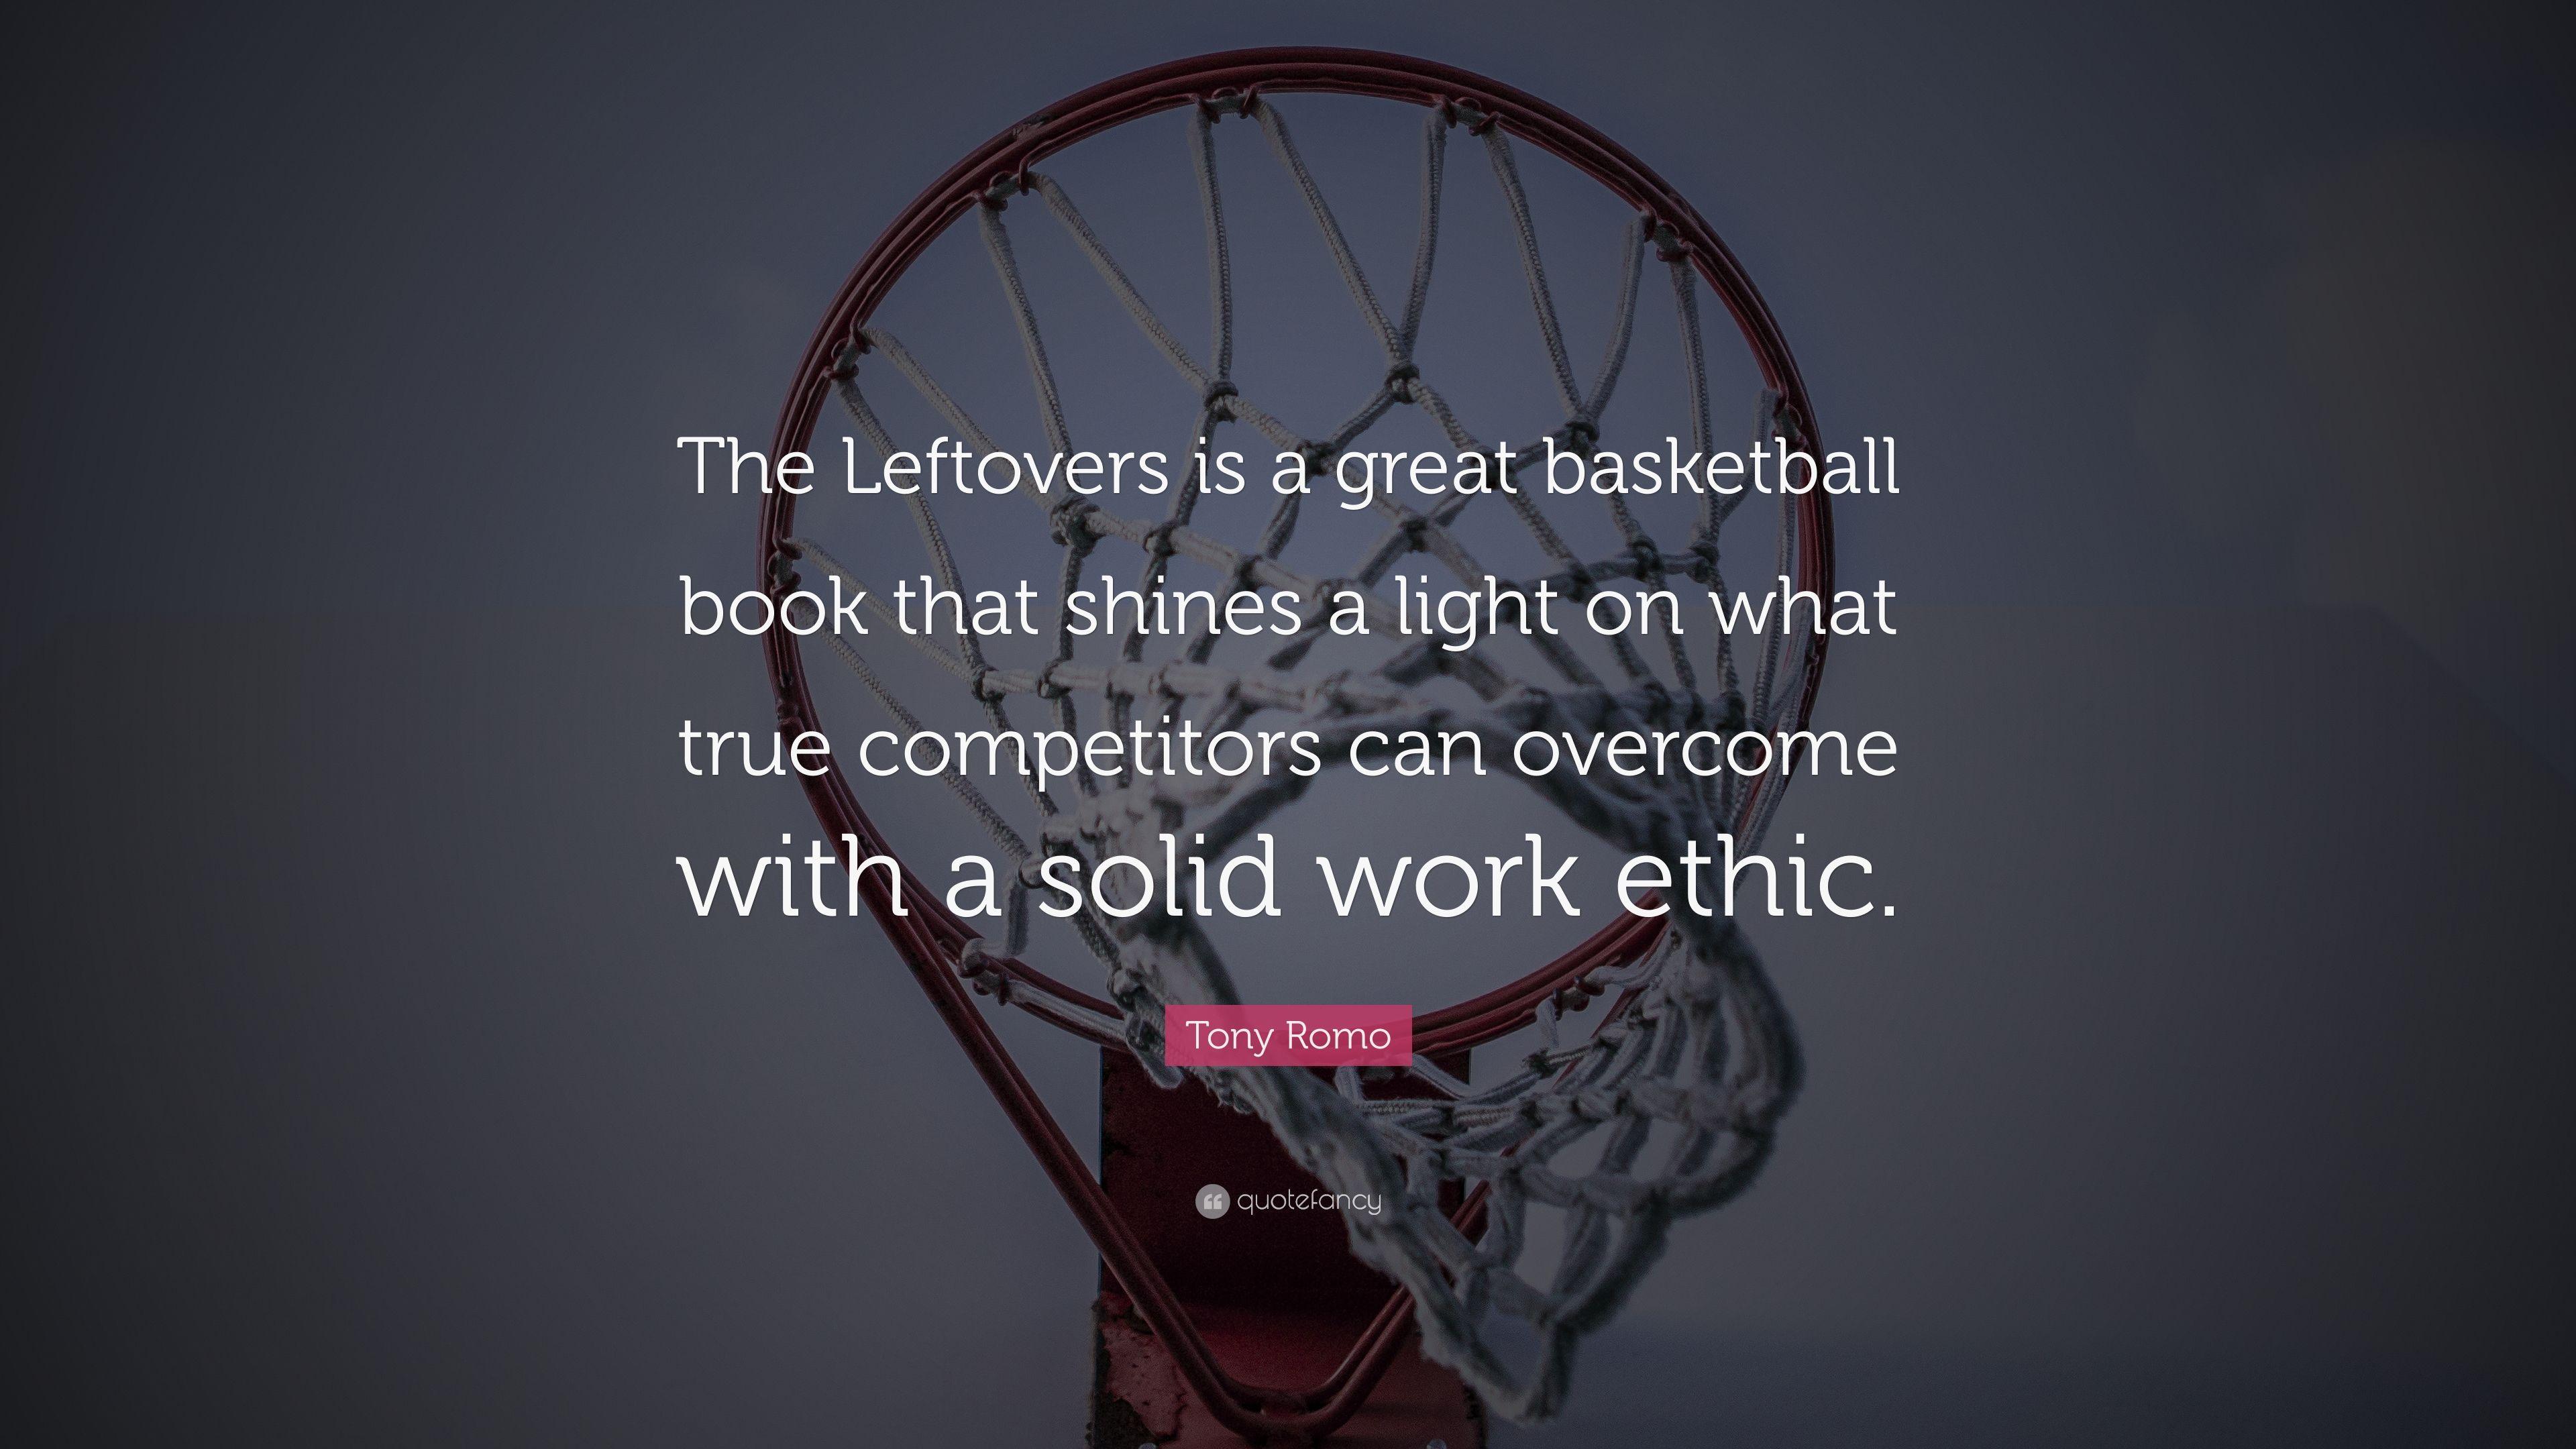 Tony Romo Quote: “The Leftovers is a great basketball book that